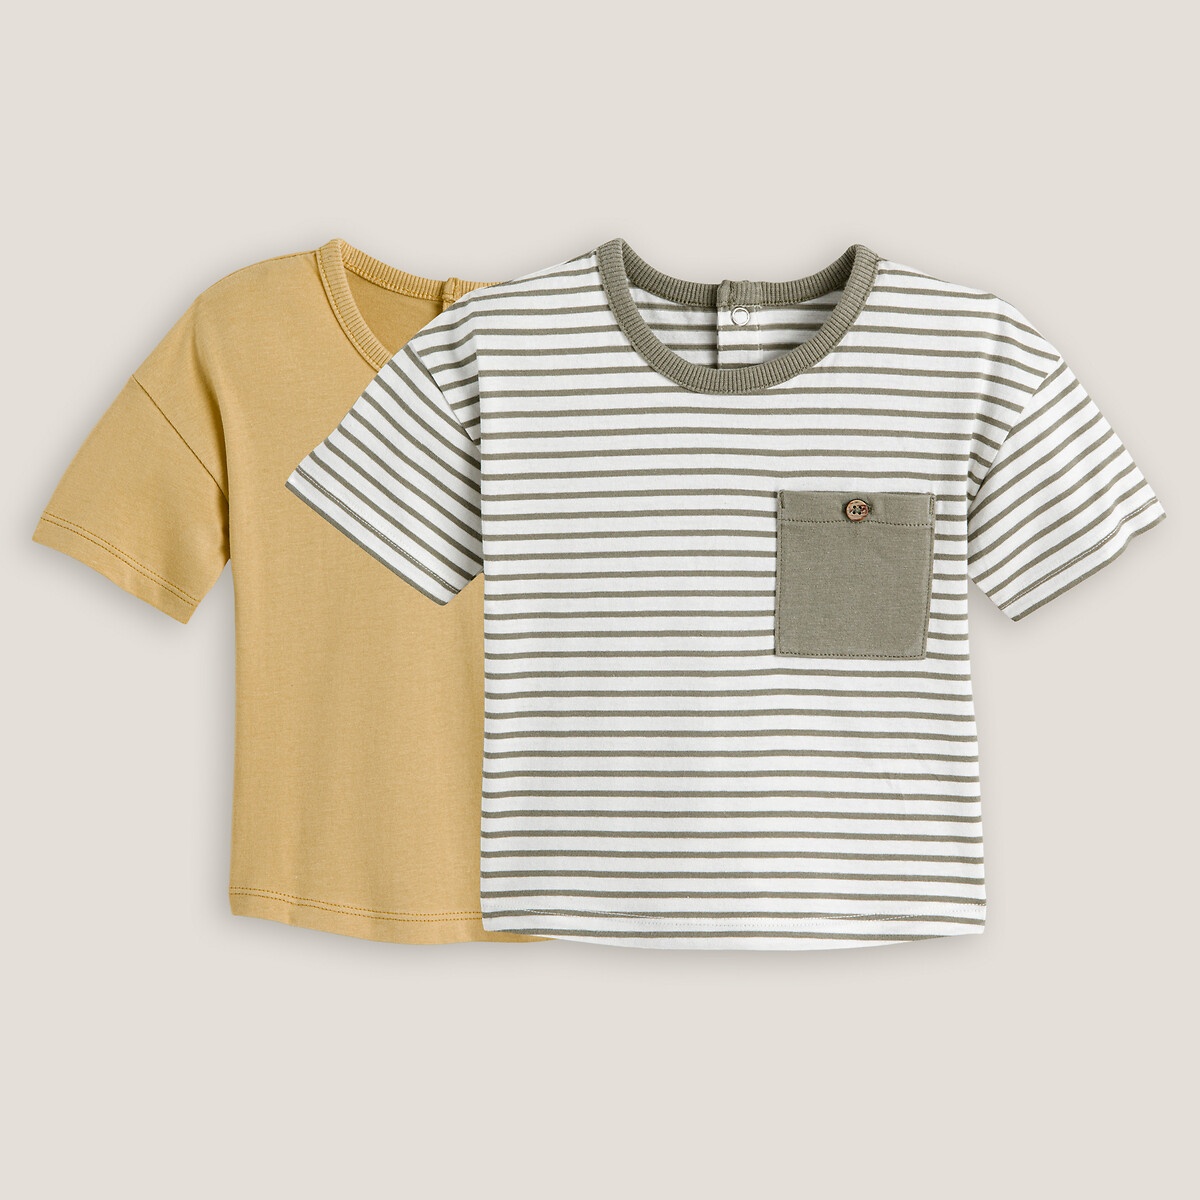 2er-Pack T-Shirts von LA REDOUTE COLLECTIONS